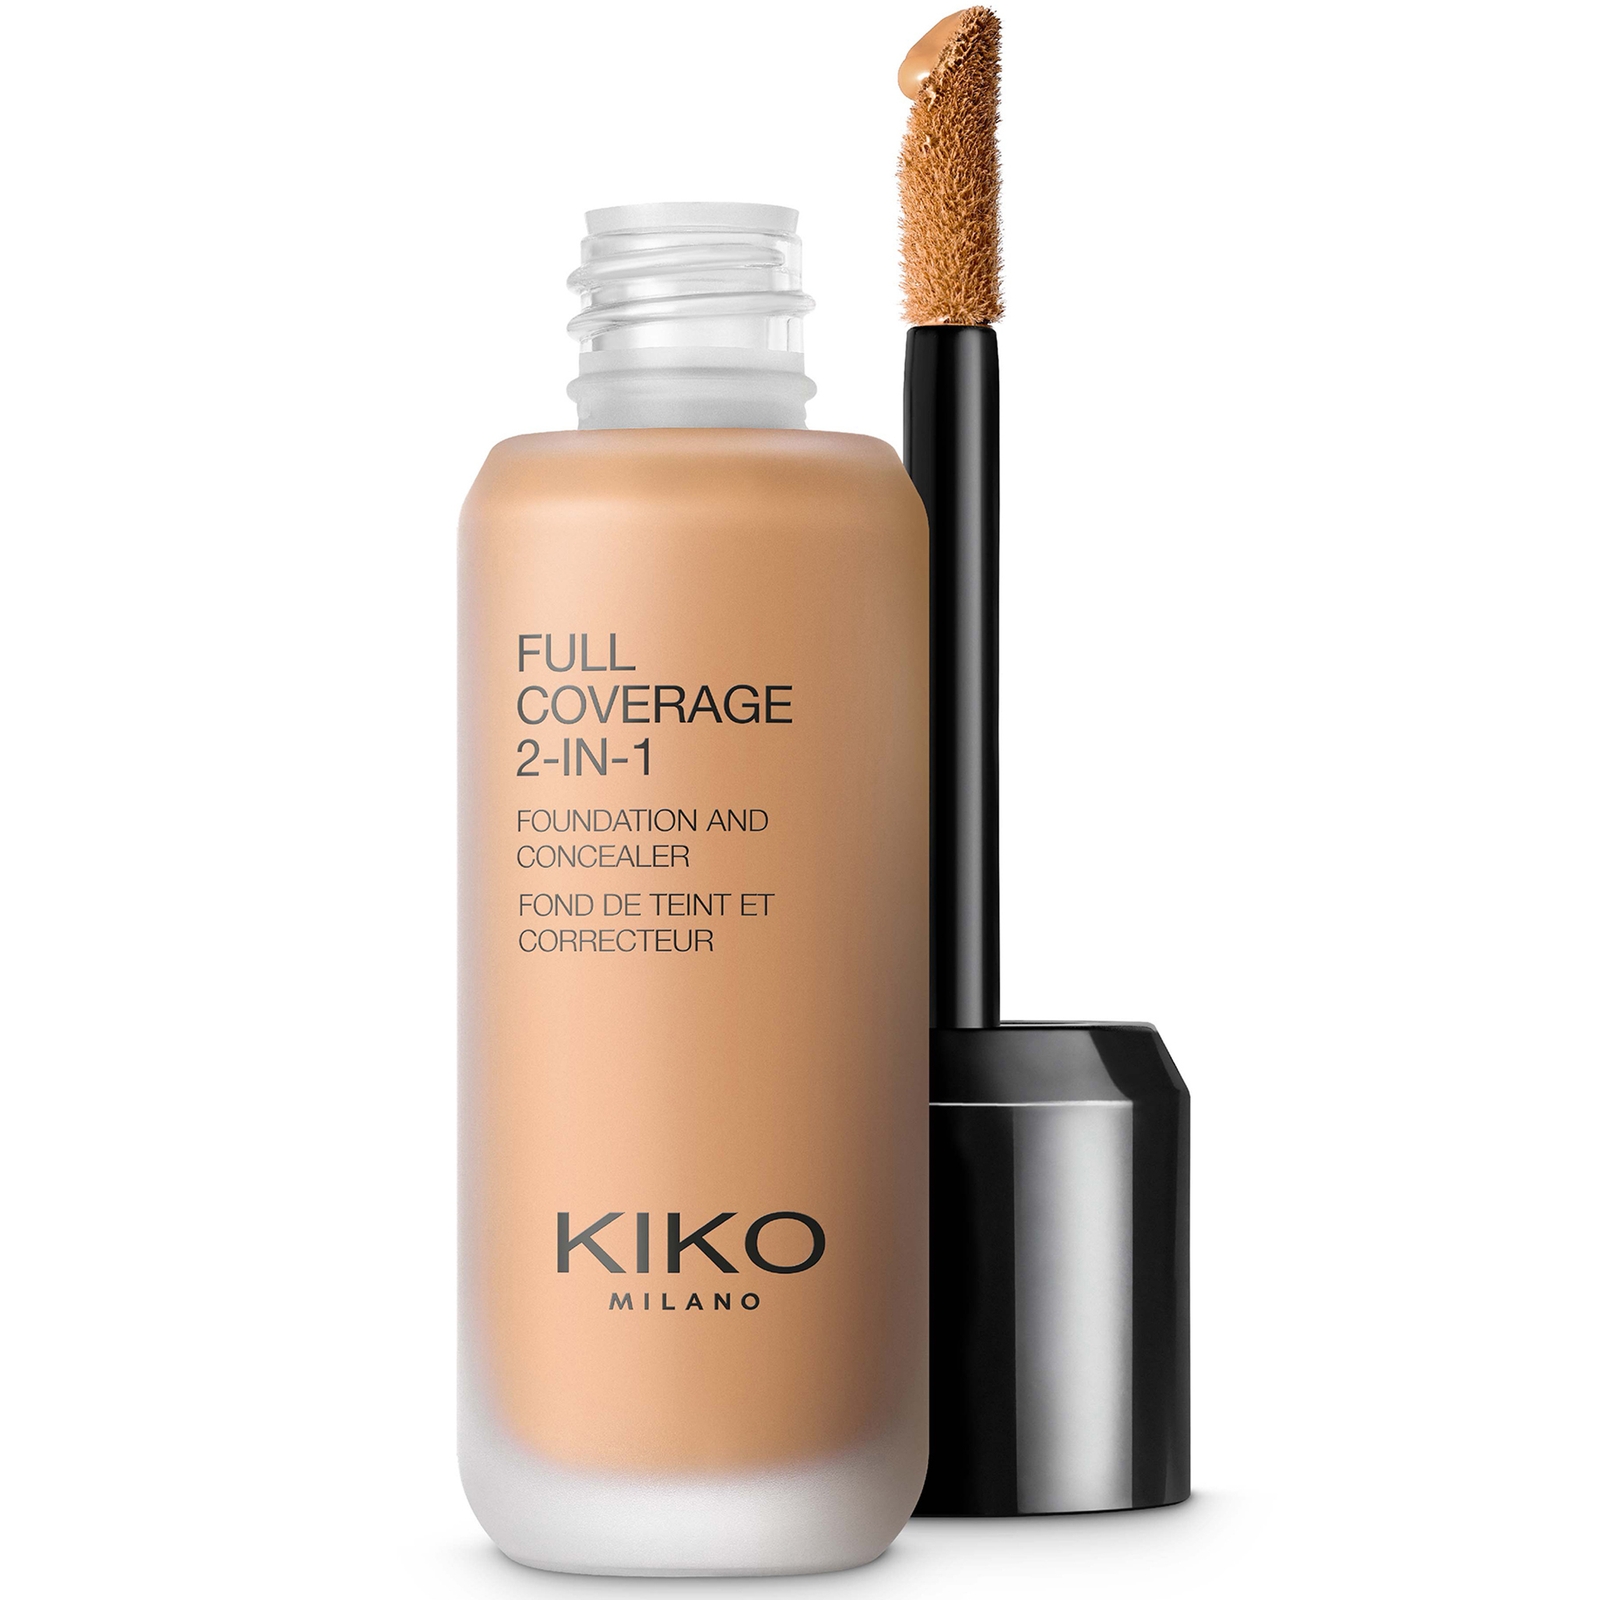 KIKO Milano Full Coverage 2-in-1 Foundation and Concealer 25ml (Various Shades) - 80 Warm Beige